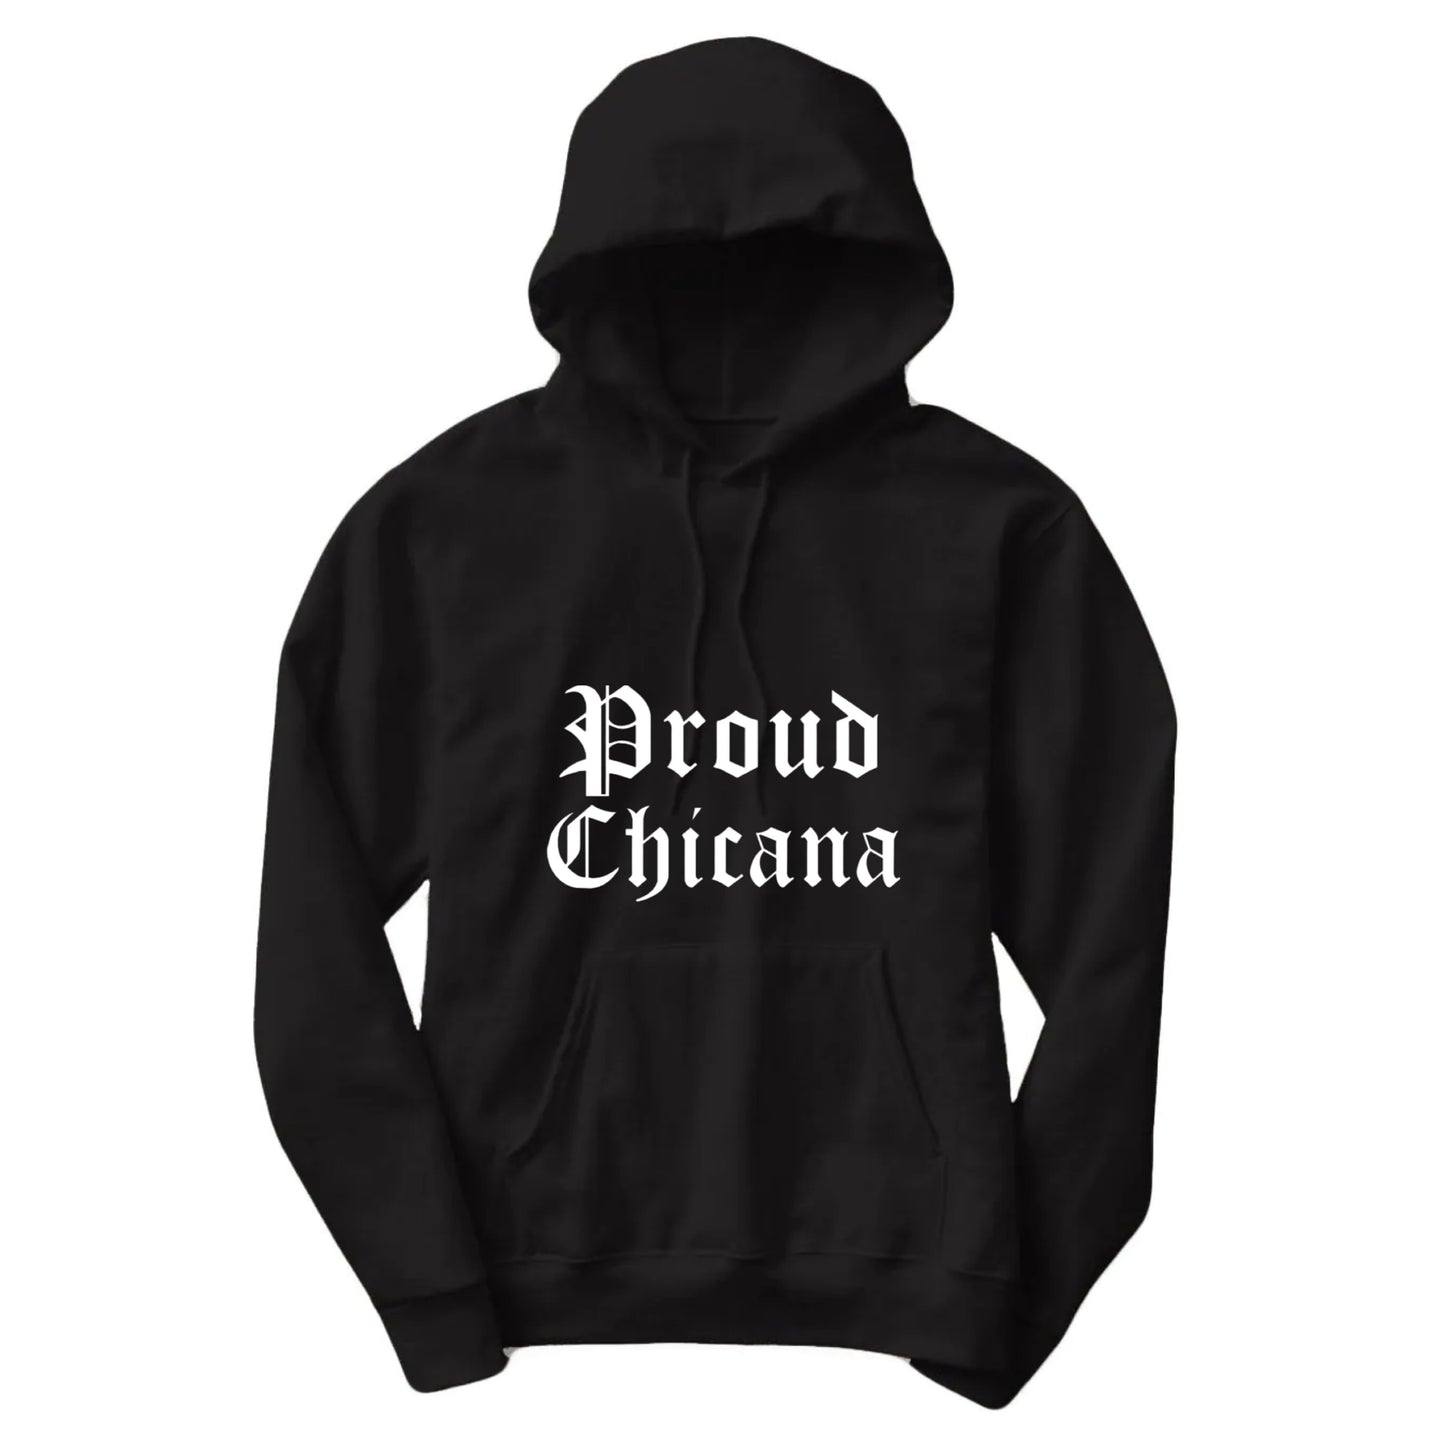 Hoodies | Proud Chicano/Chicana/Chicanx unisex size